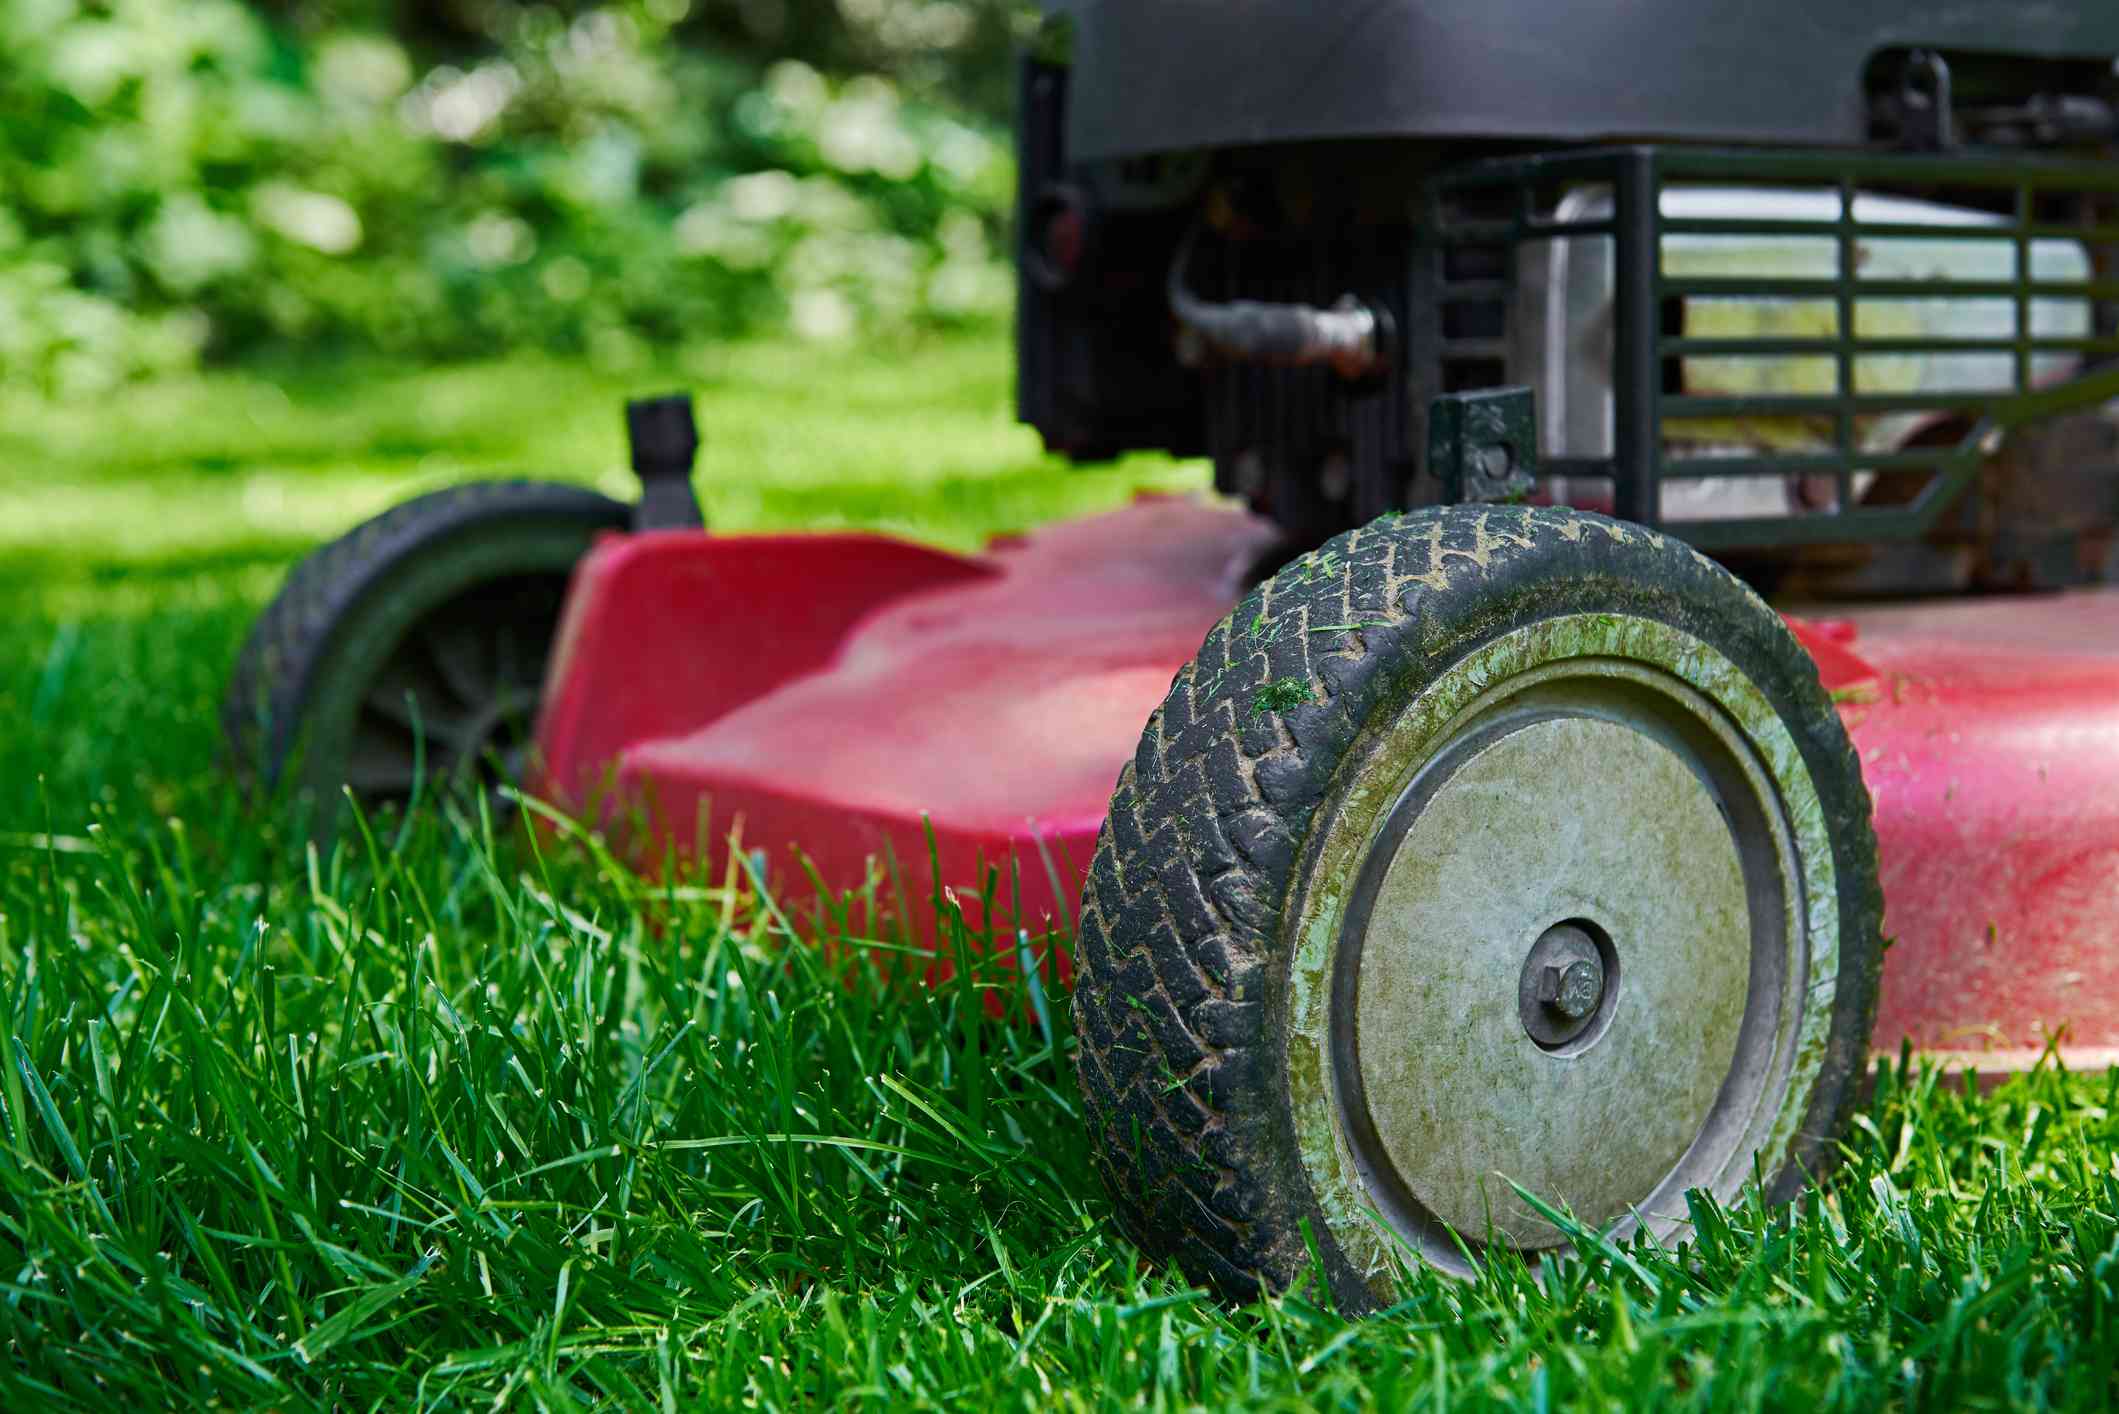 Can i put larger wheels on lawnmower?